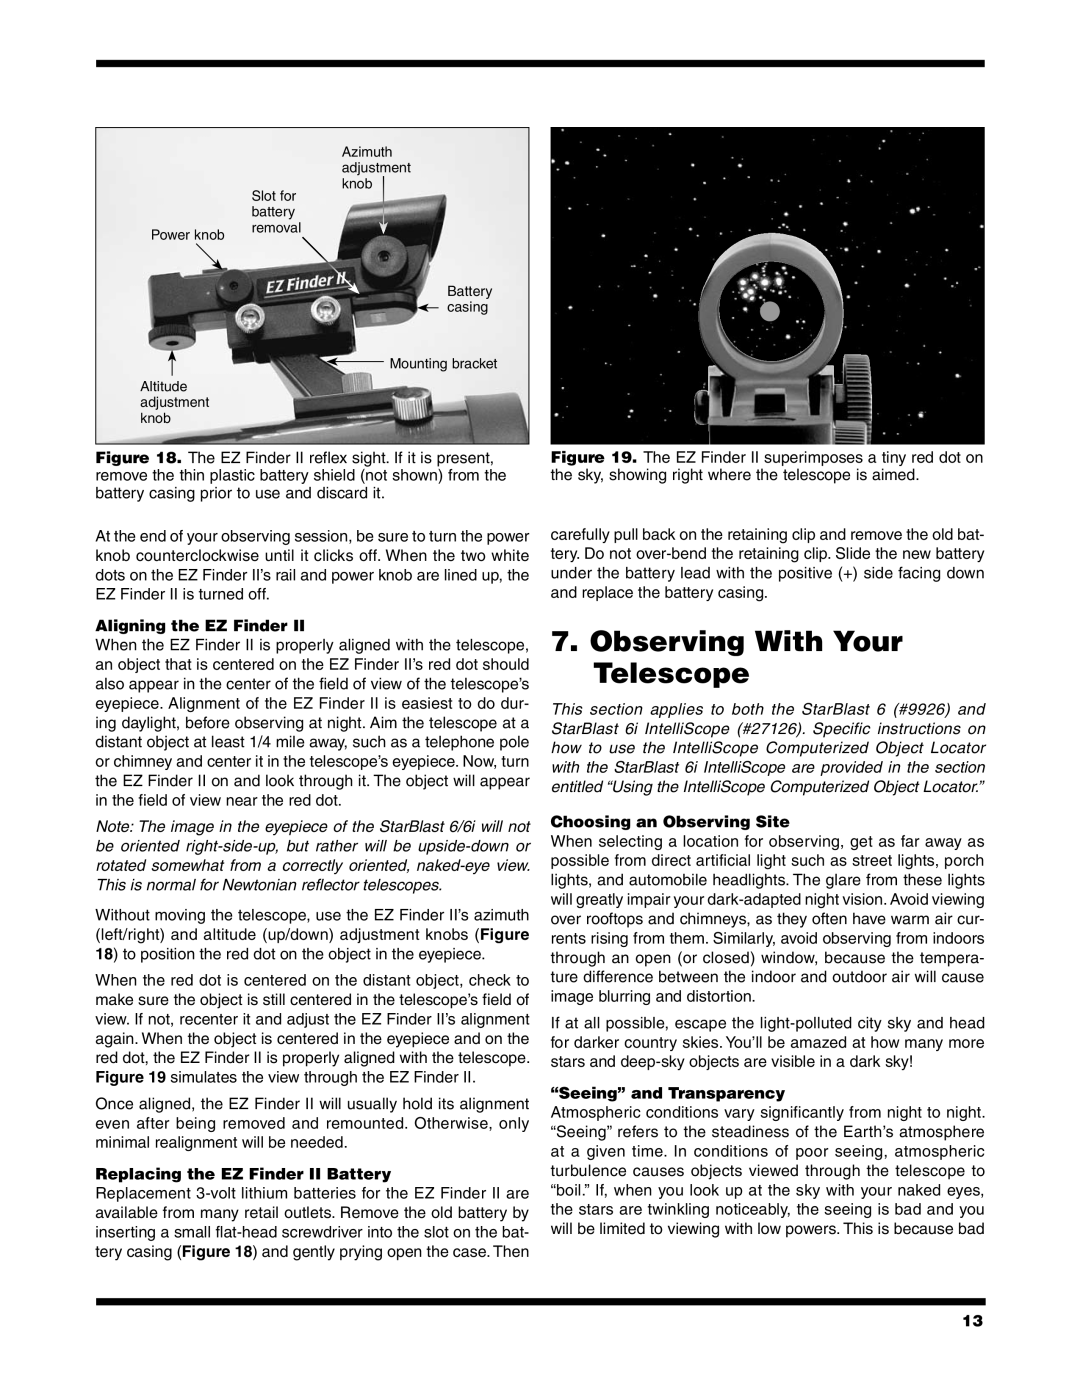 Orion 6/6I instruction manual Observing With Your Telescope, Aligning the EZ Finder, Replacing the EZ Finder II Battery 